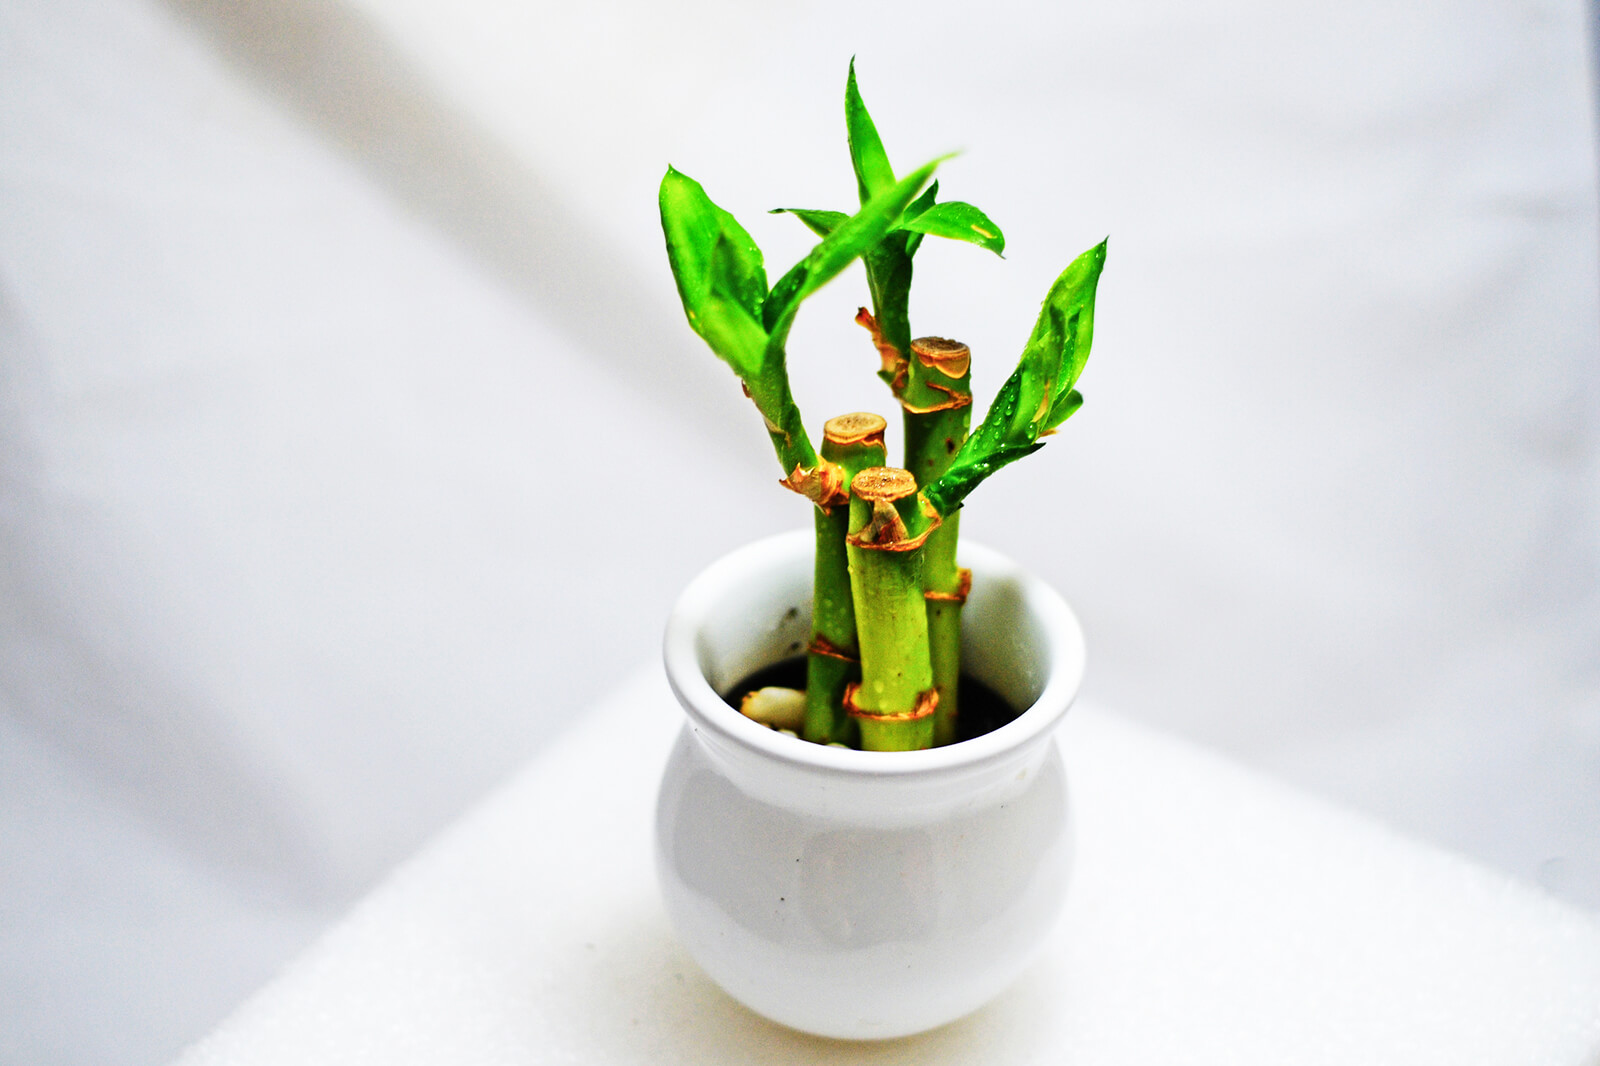 How To Trim A Bamboo Plant